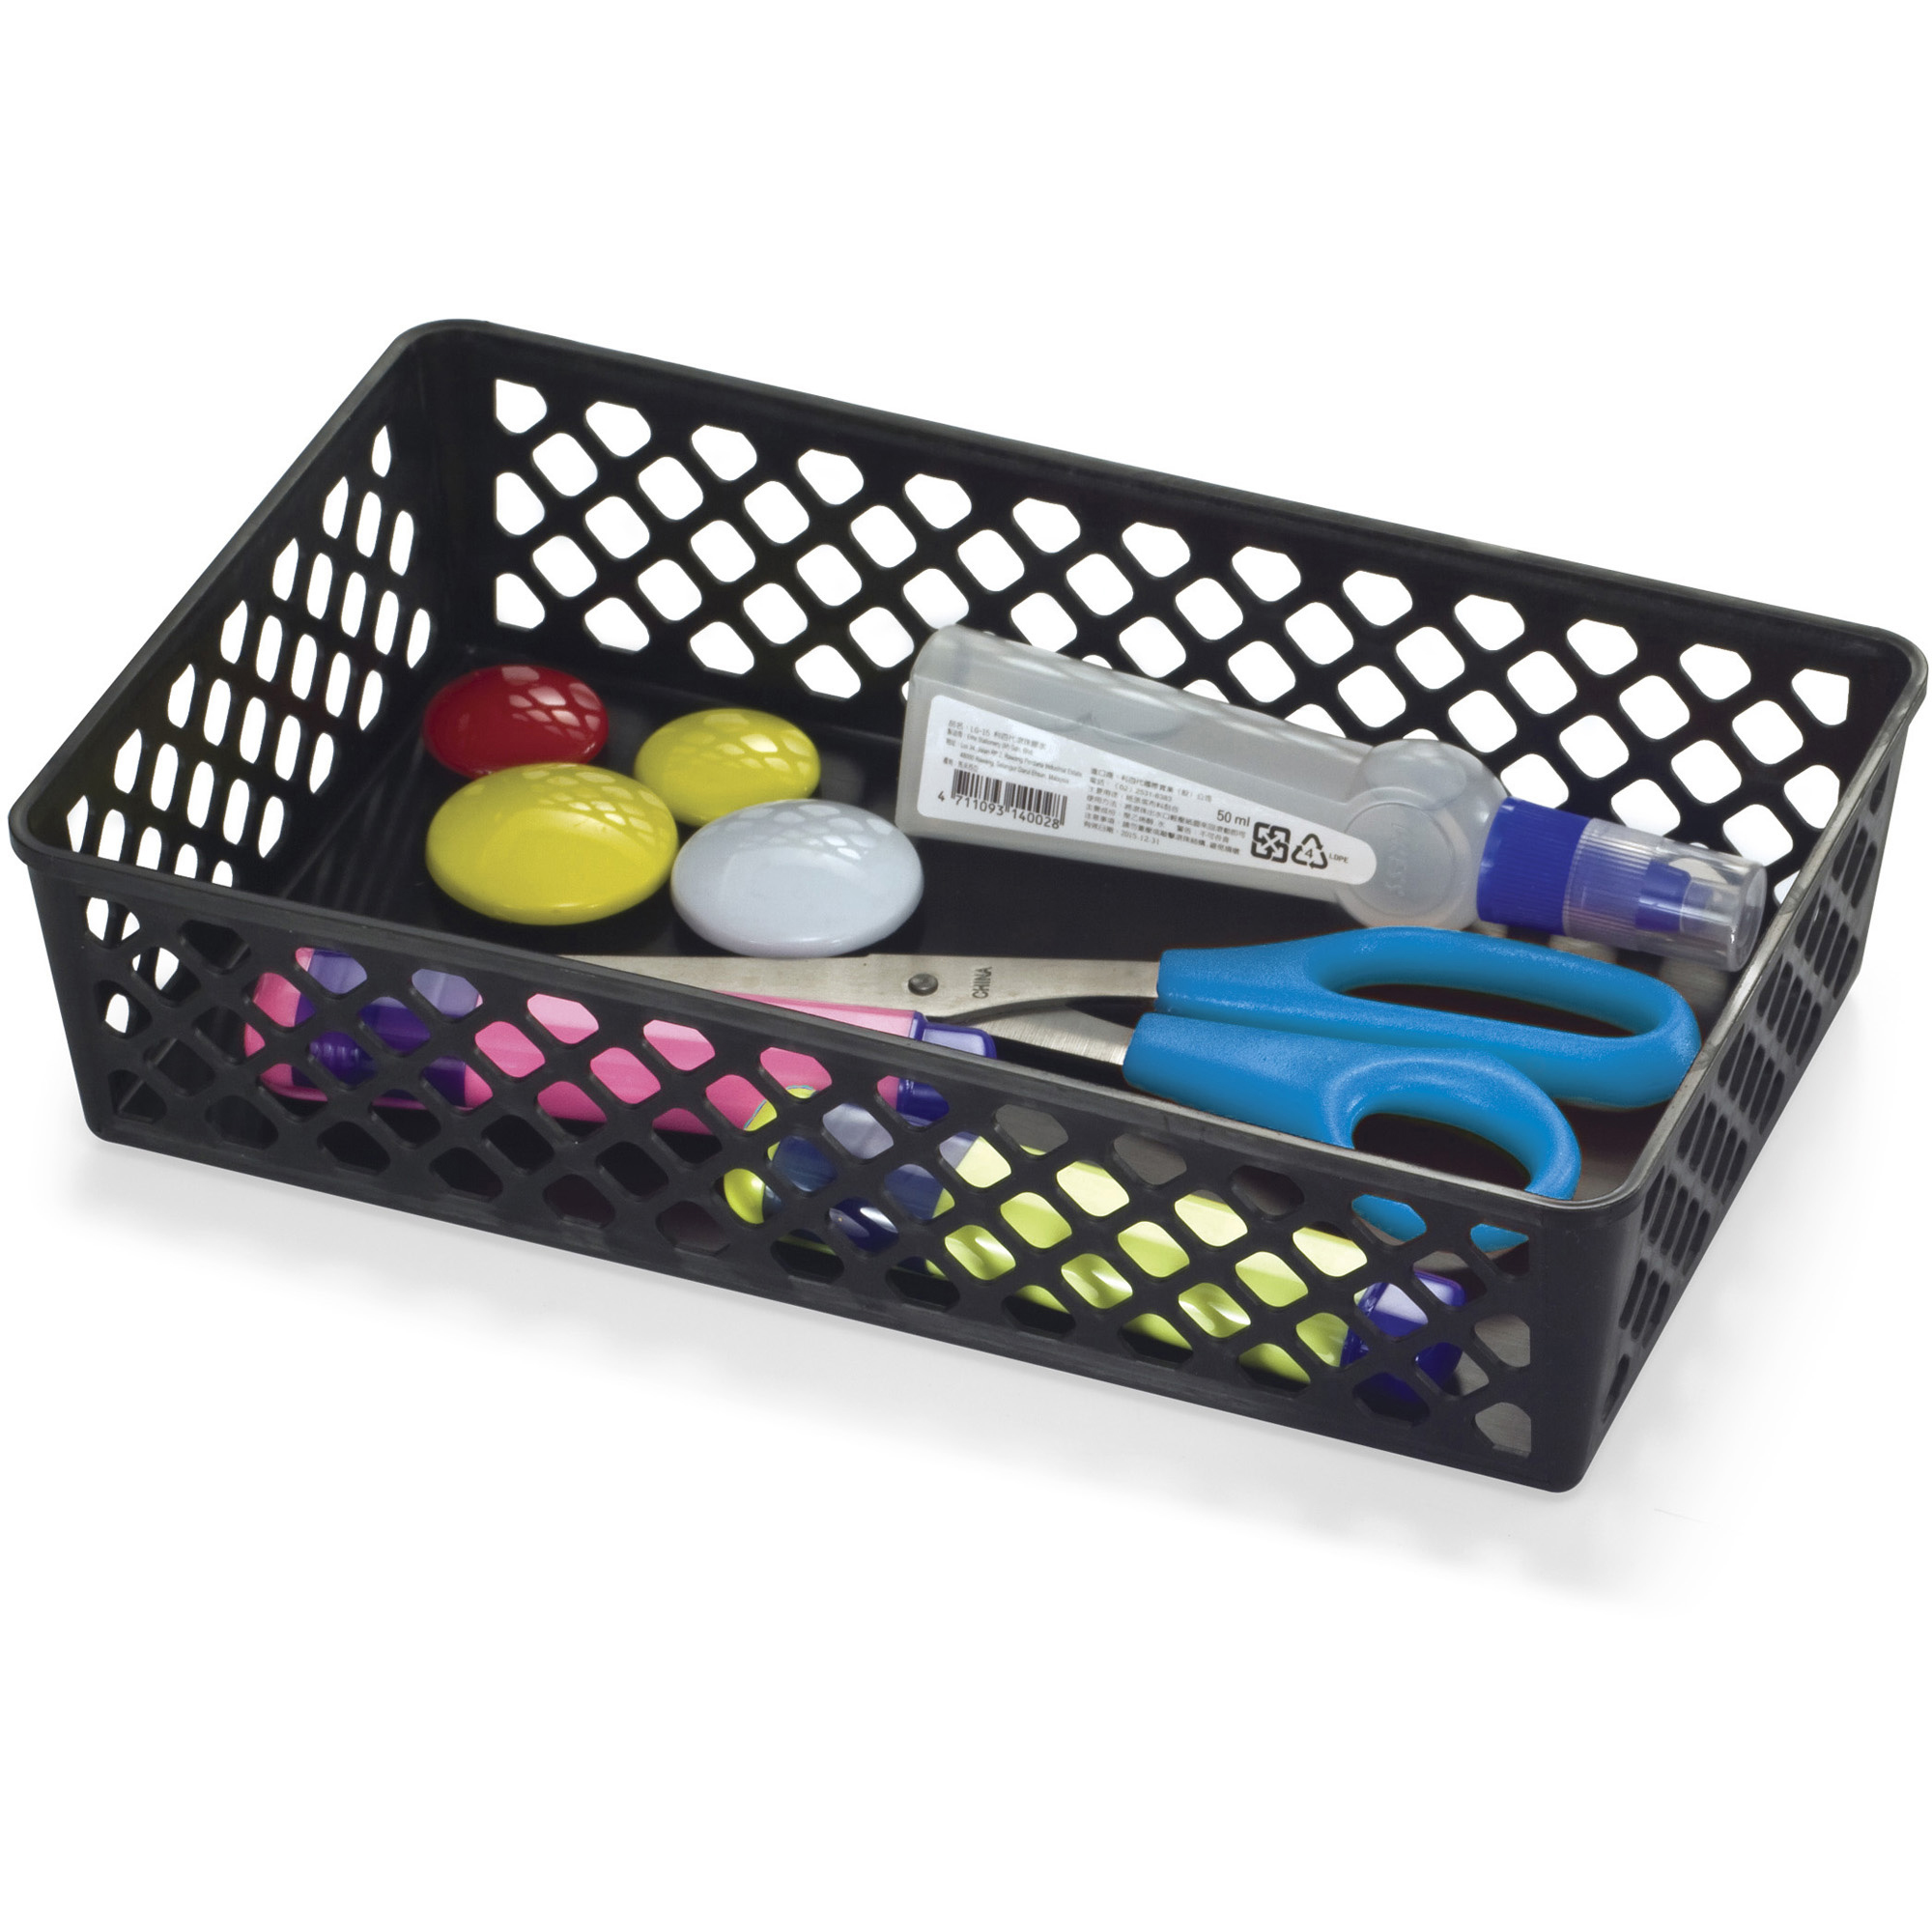 Officemate Supply Baskets - 2.4